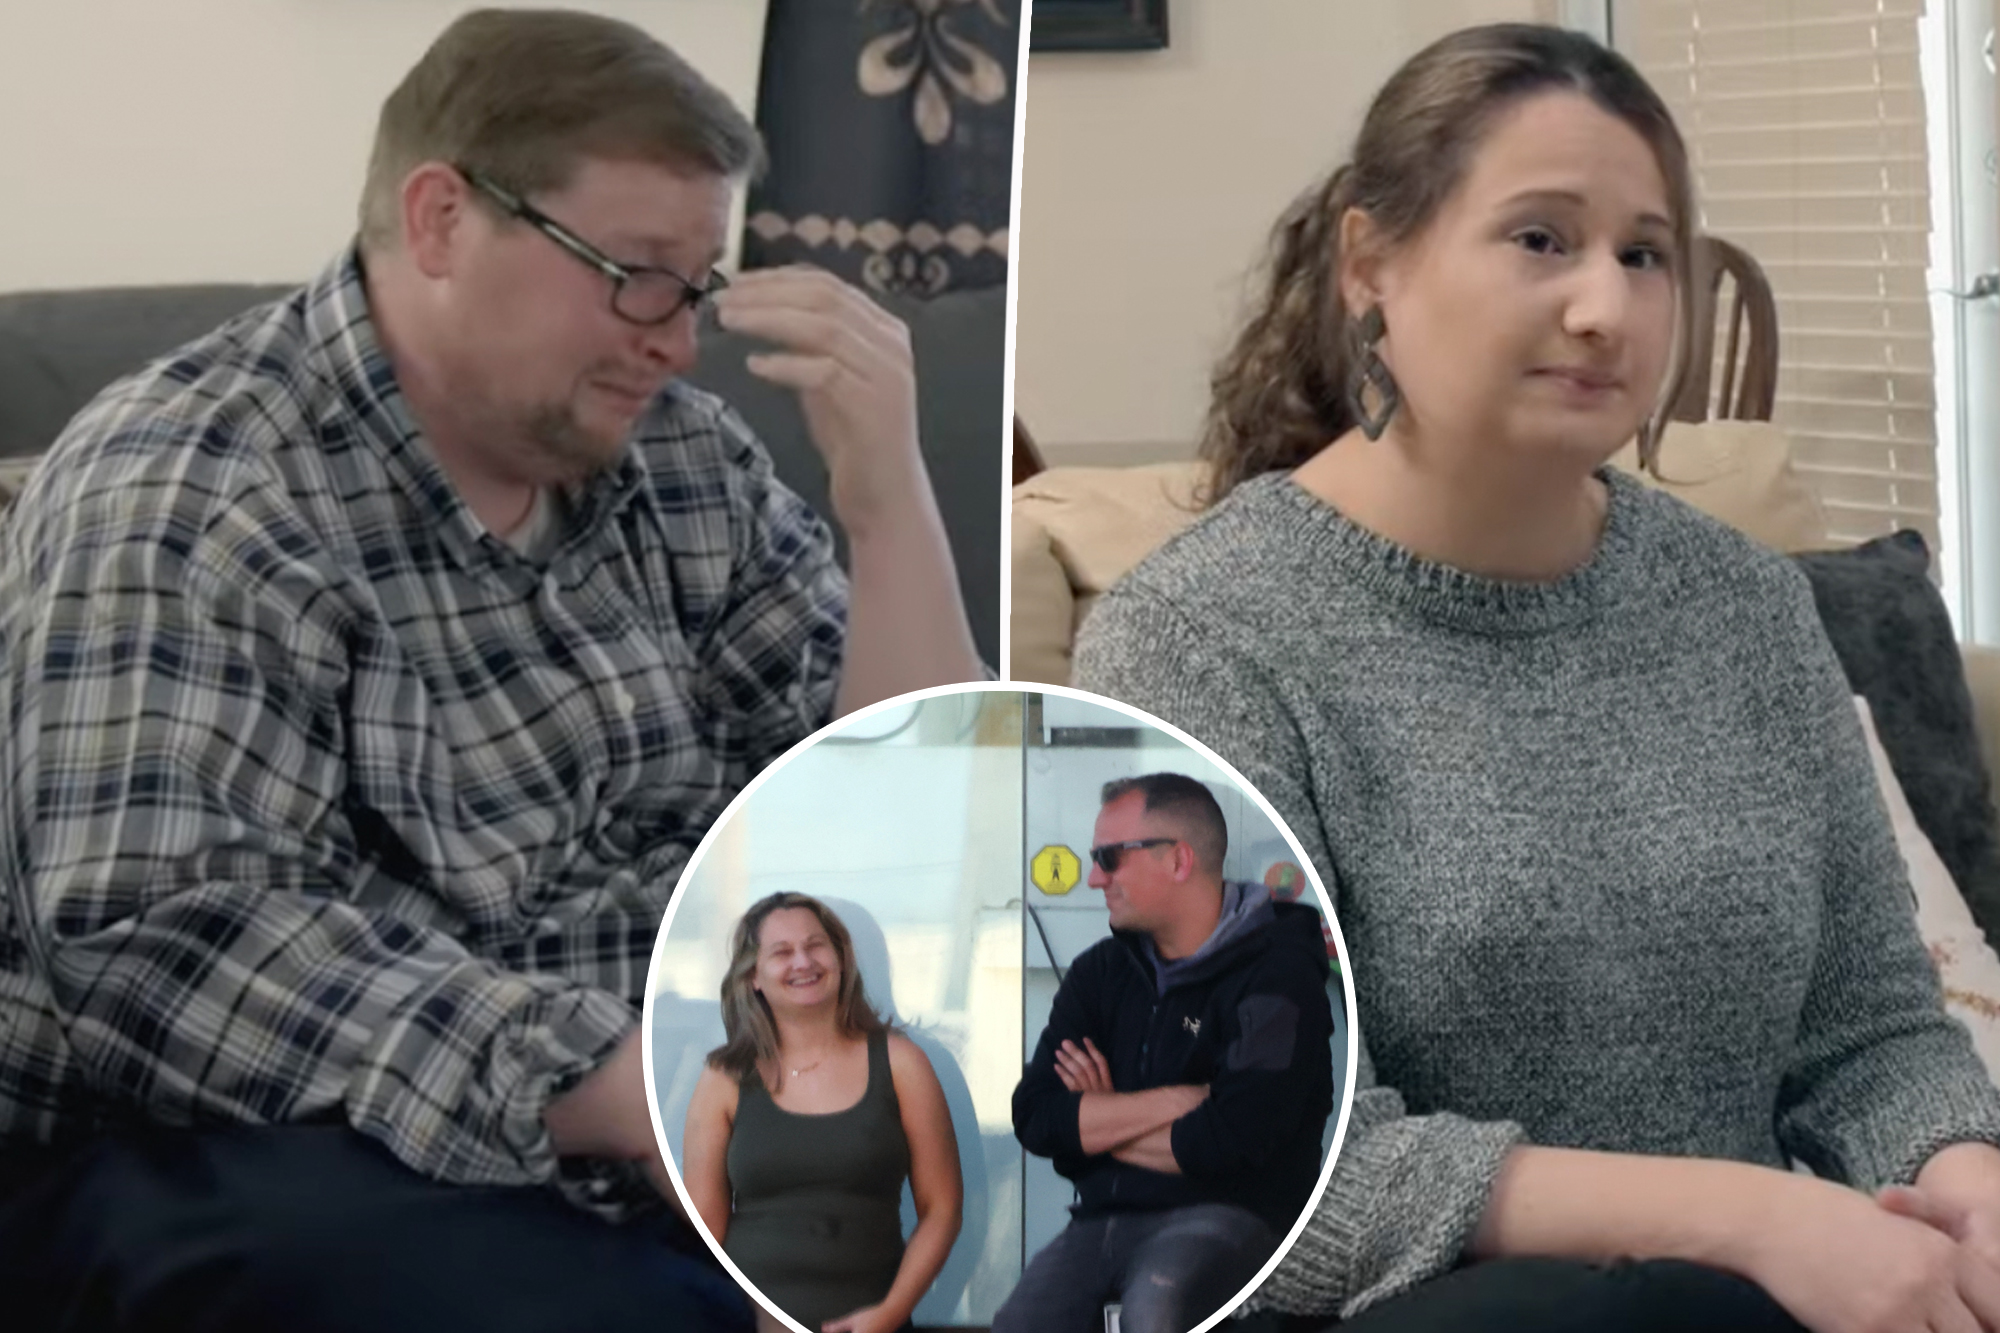 Gypsy Rose Blanchard and Ryan Anderson argue over her ex Ken Urker in new trailer for Lifetime series